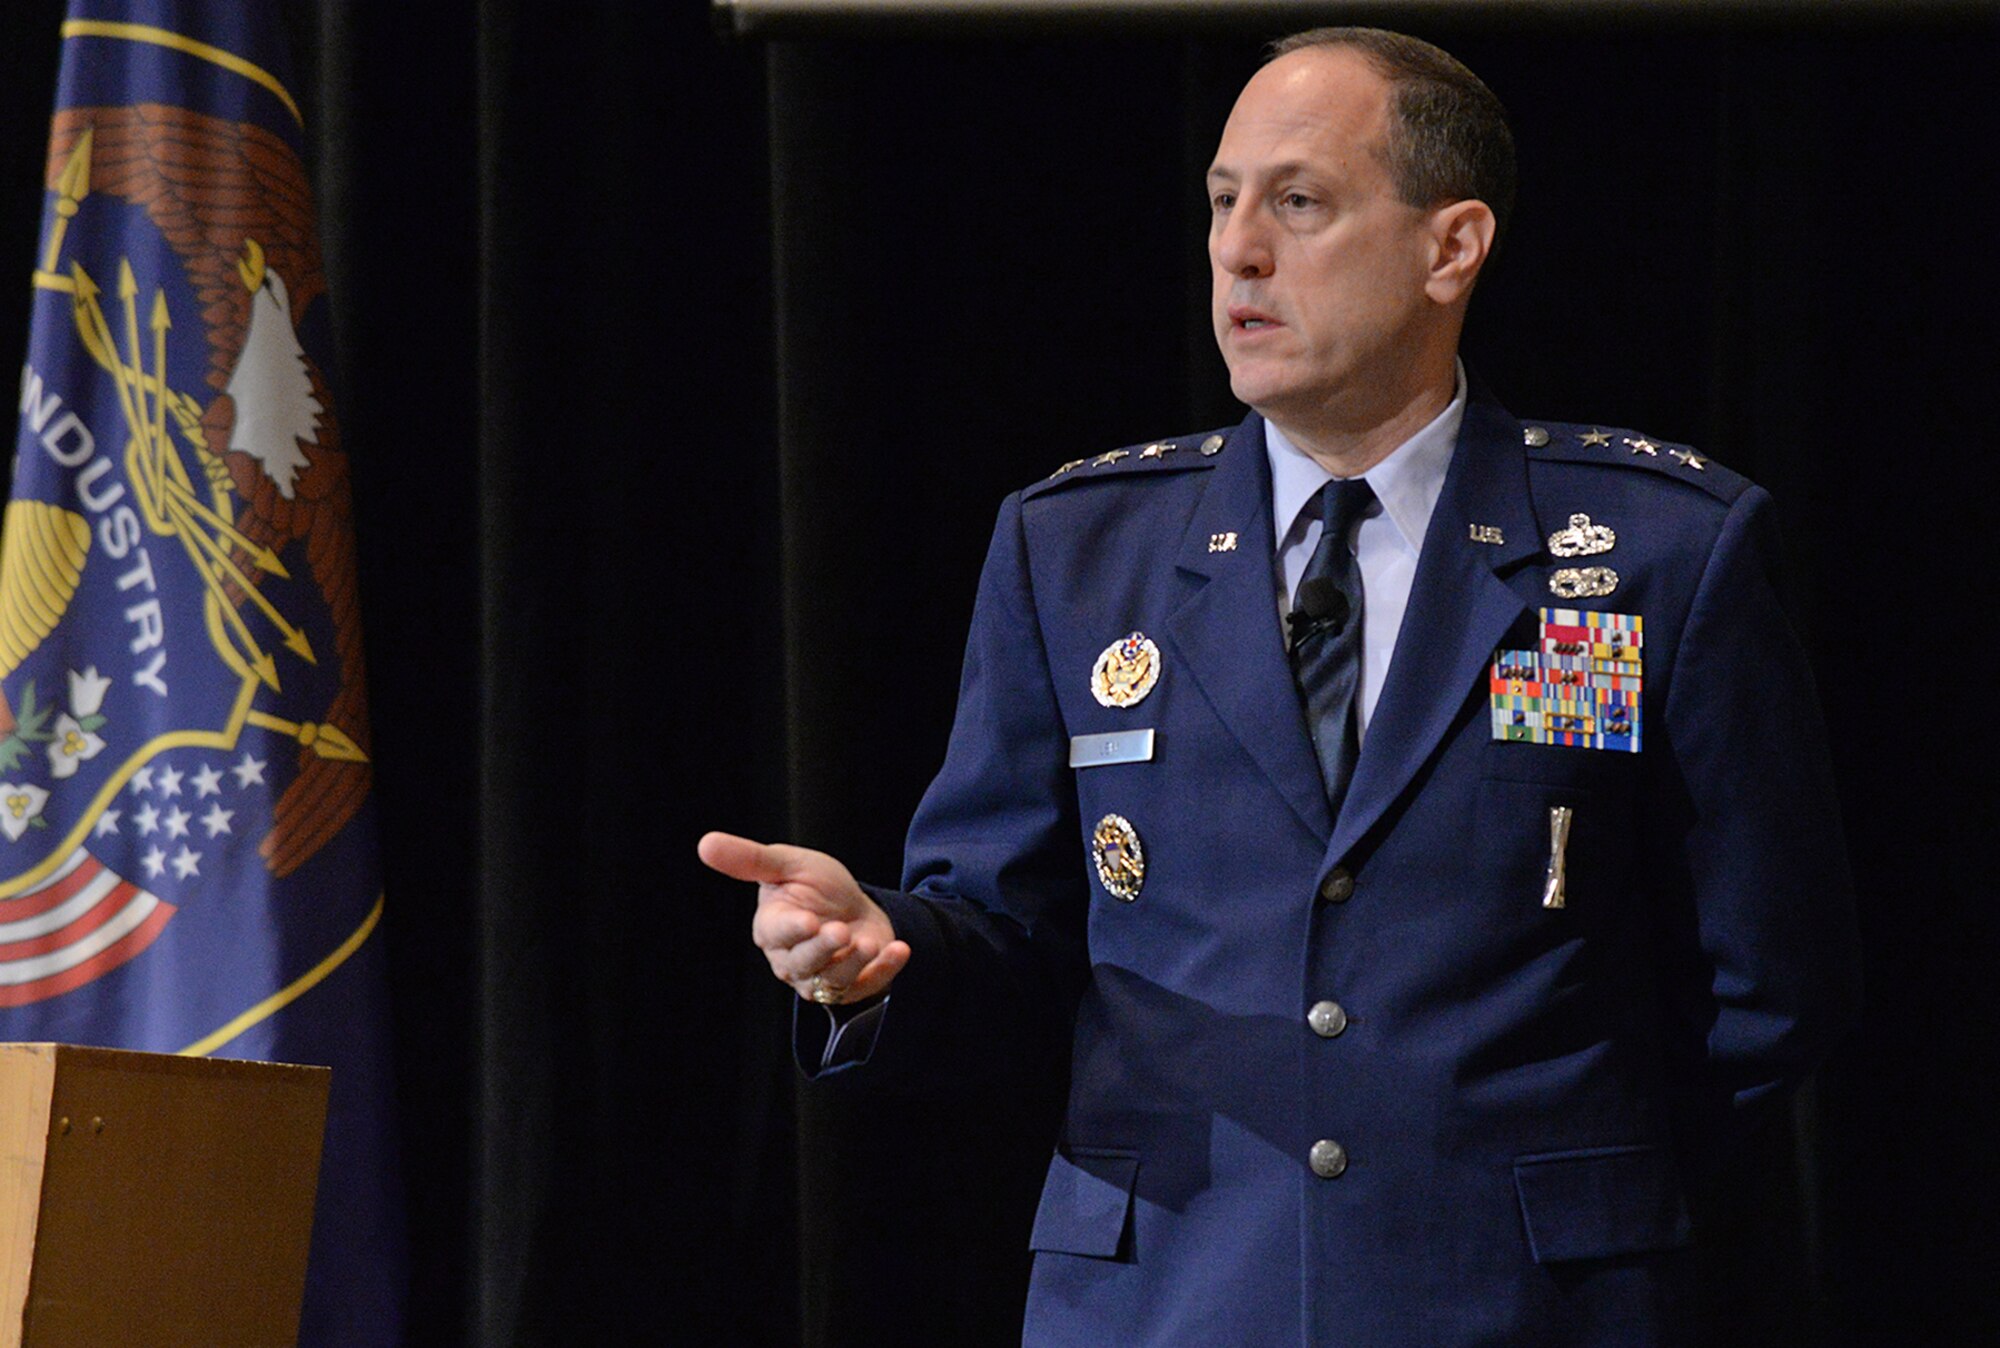 Lt. Gen. Lee K. Levy II, Air Force Sustainment Center commander, addresses a group of nearly 200 military and civilian Airmen as well as Utah state officials and aerospace industry leaders June 15 in Ogden, Utah. Levy spoke on the challenges facing the modern aerospace-sustainment enterprise at the Focus on Defense Symposium. (Air Force photo by Alex R. Lloyd)